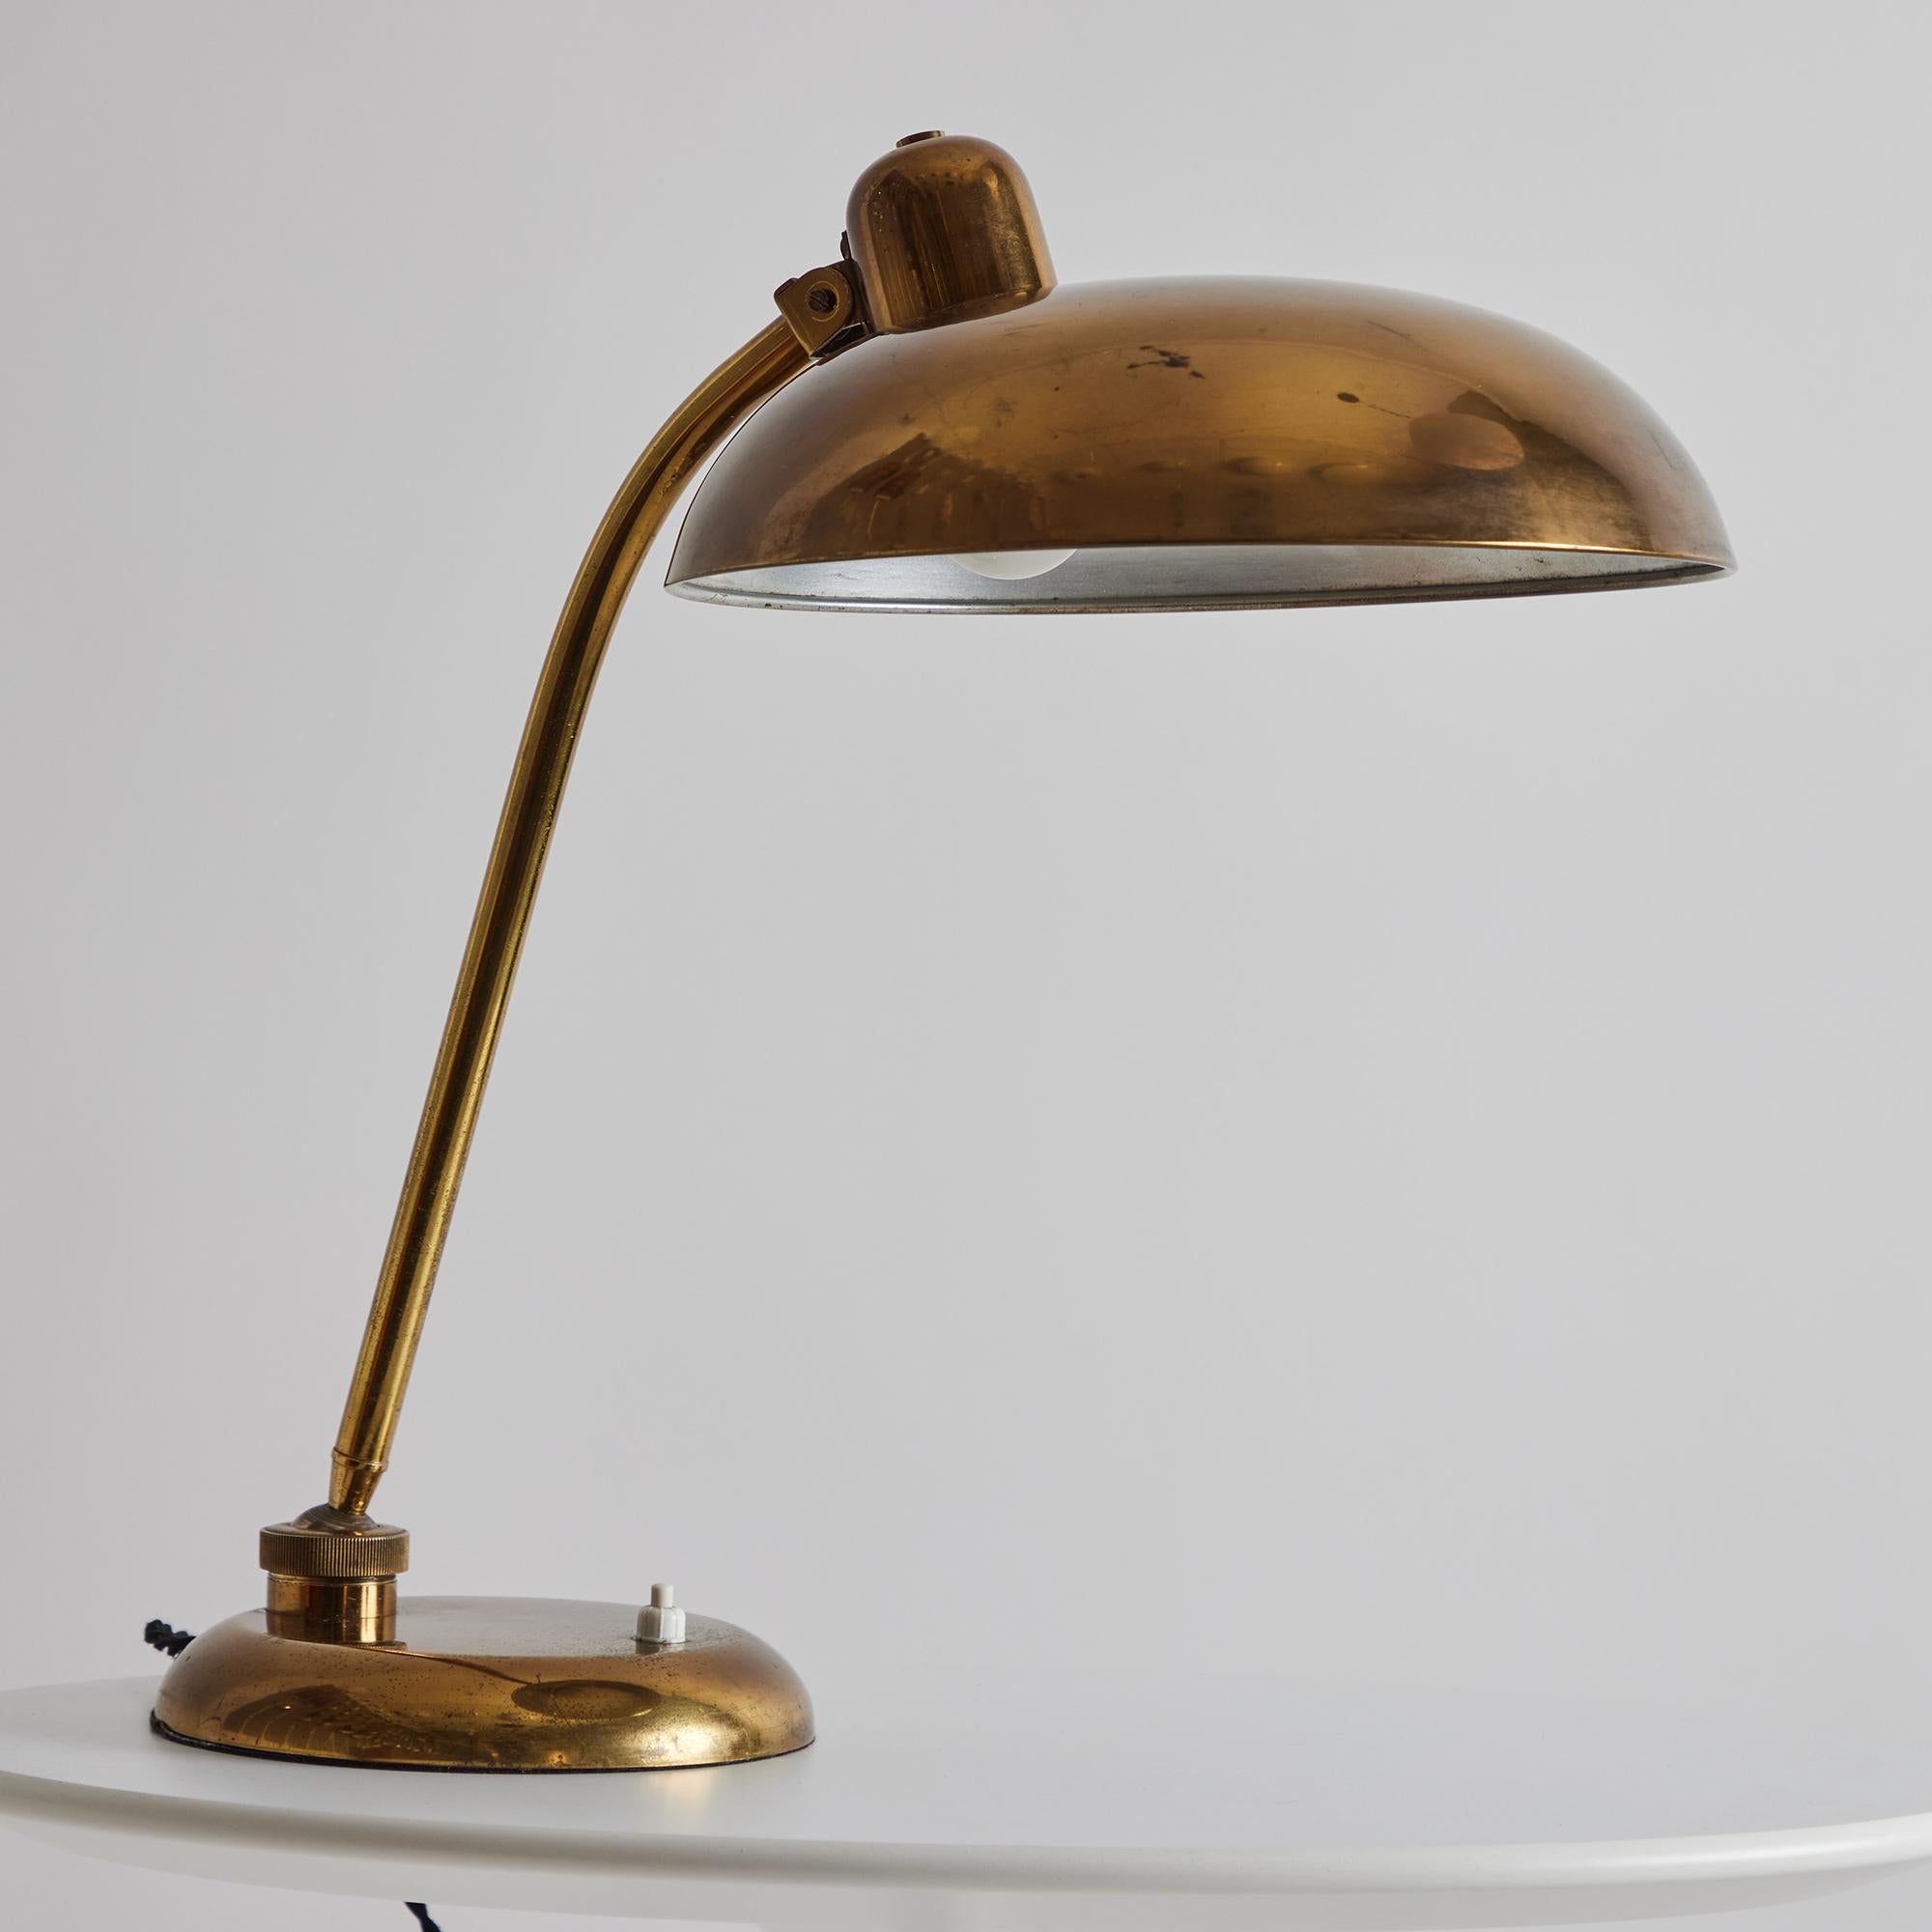 1940s Giovanni Michelucci Patinated Brass Ministerial Table Lamp for Lariolux For Sale 8